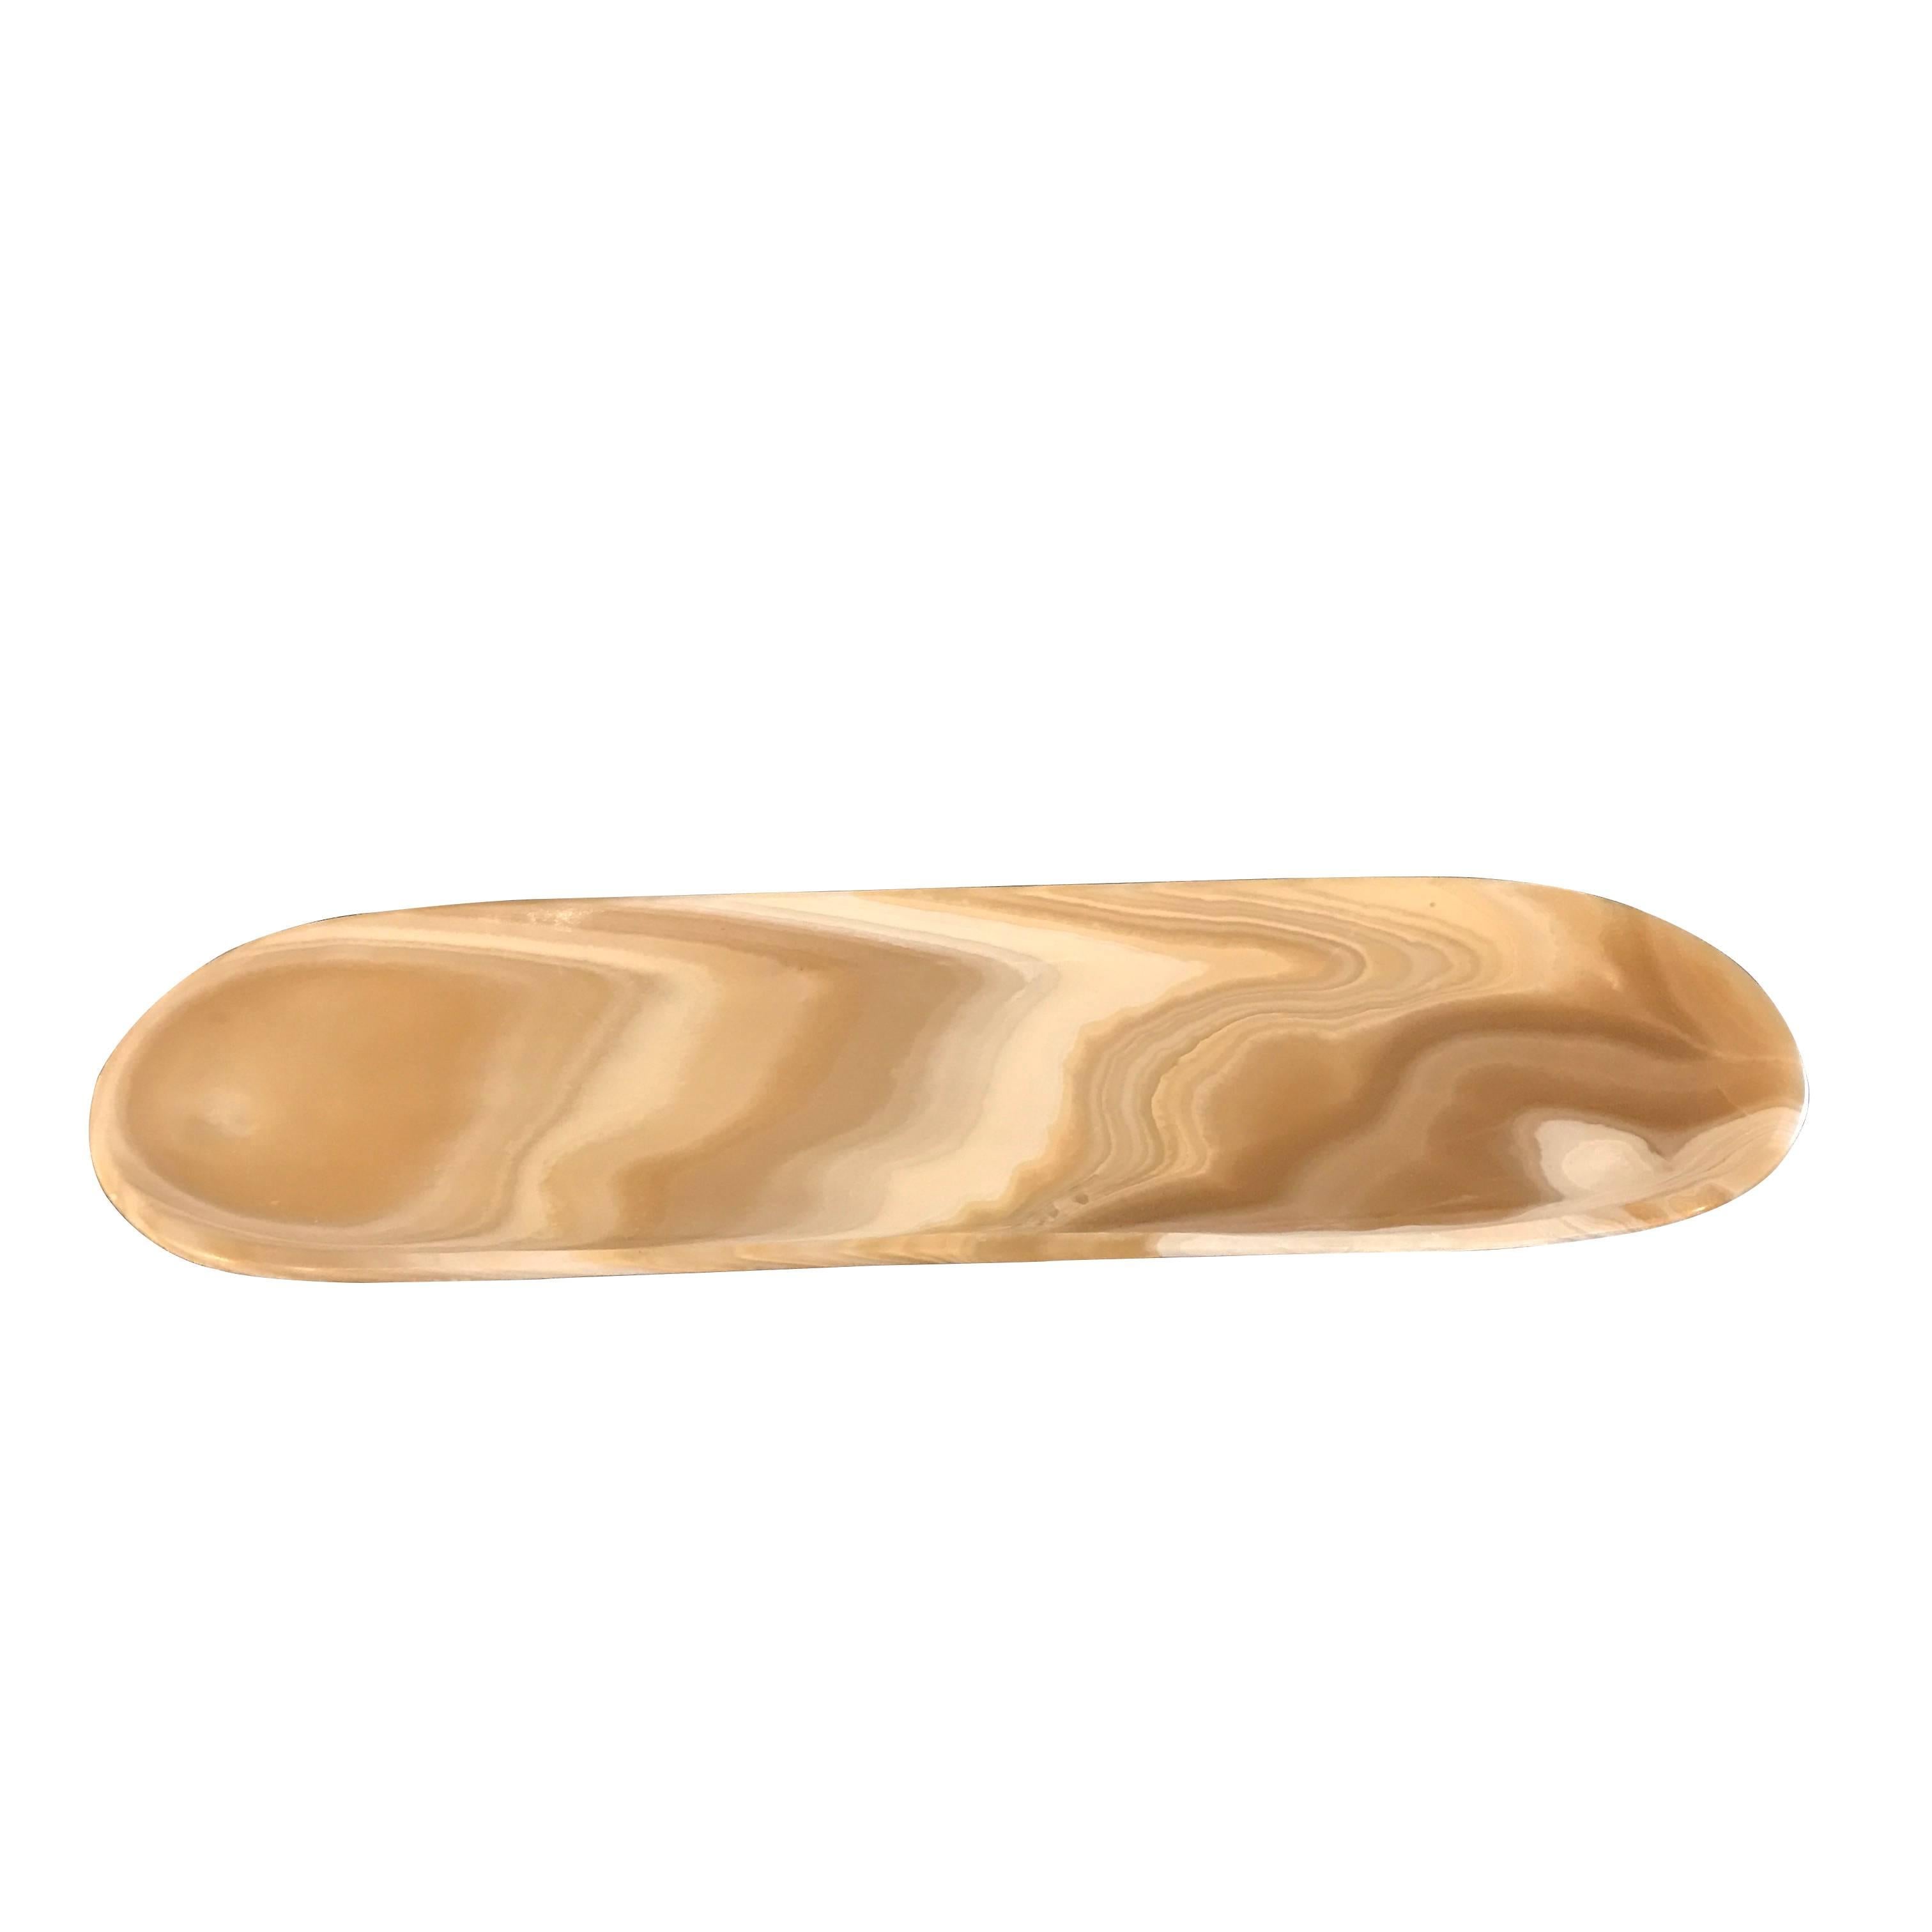 Contemporary honey colored onyx oval shaped tray.
Two patterns available. 
S4676A
S4676B
See images 2,3,4.